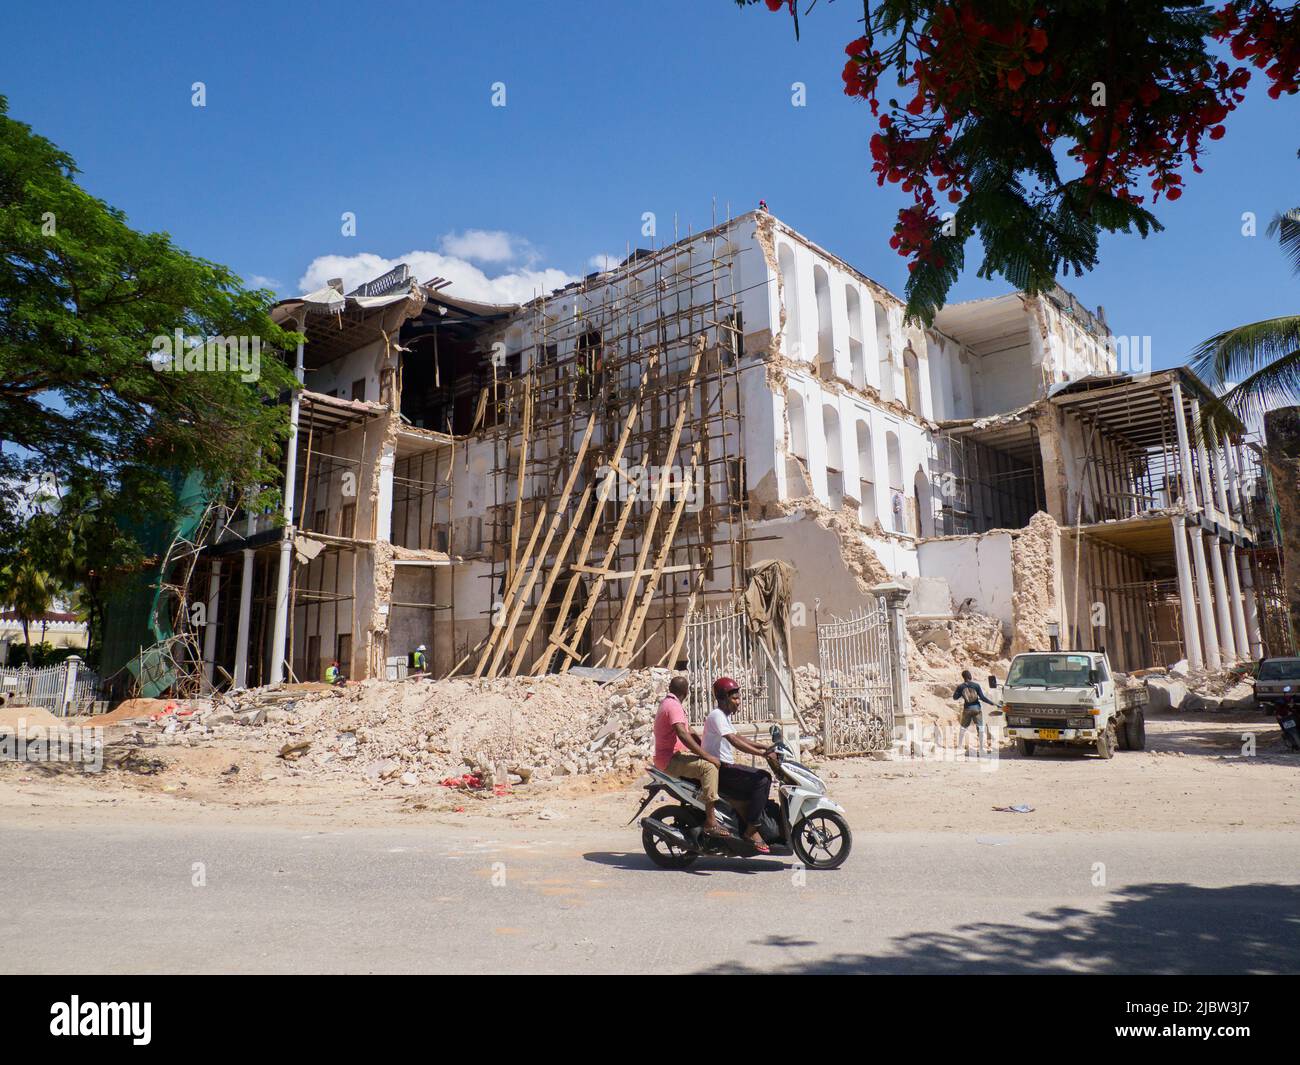 Stone Town, Zanzibar - Jan, 2021: Collapsed House of Wonders or Palace of Wonders (Arabic: Beit-el-Ajaib) which housed the Museum of History and Cultu Stock Photo